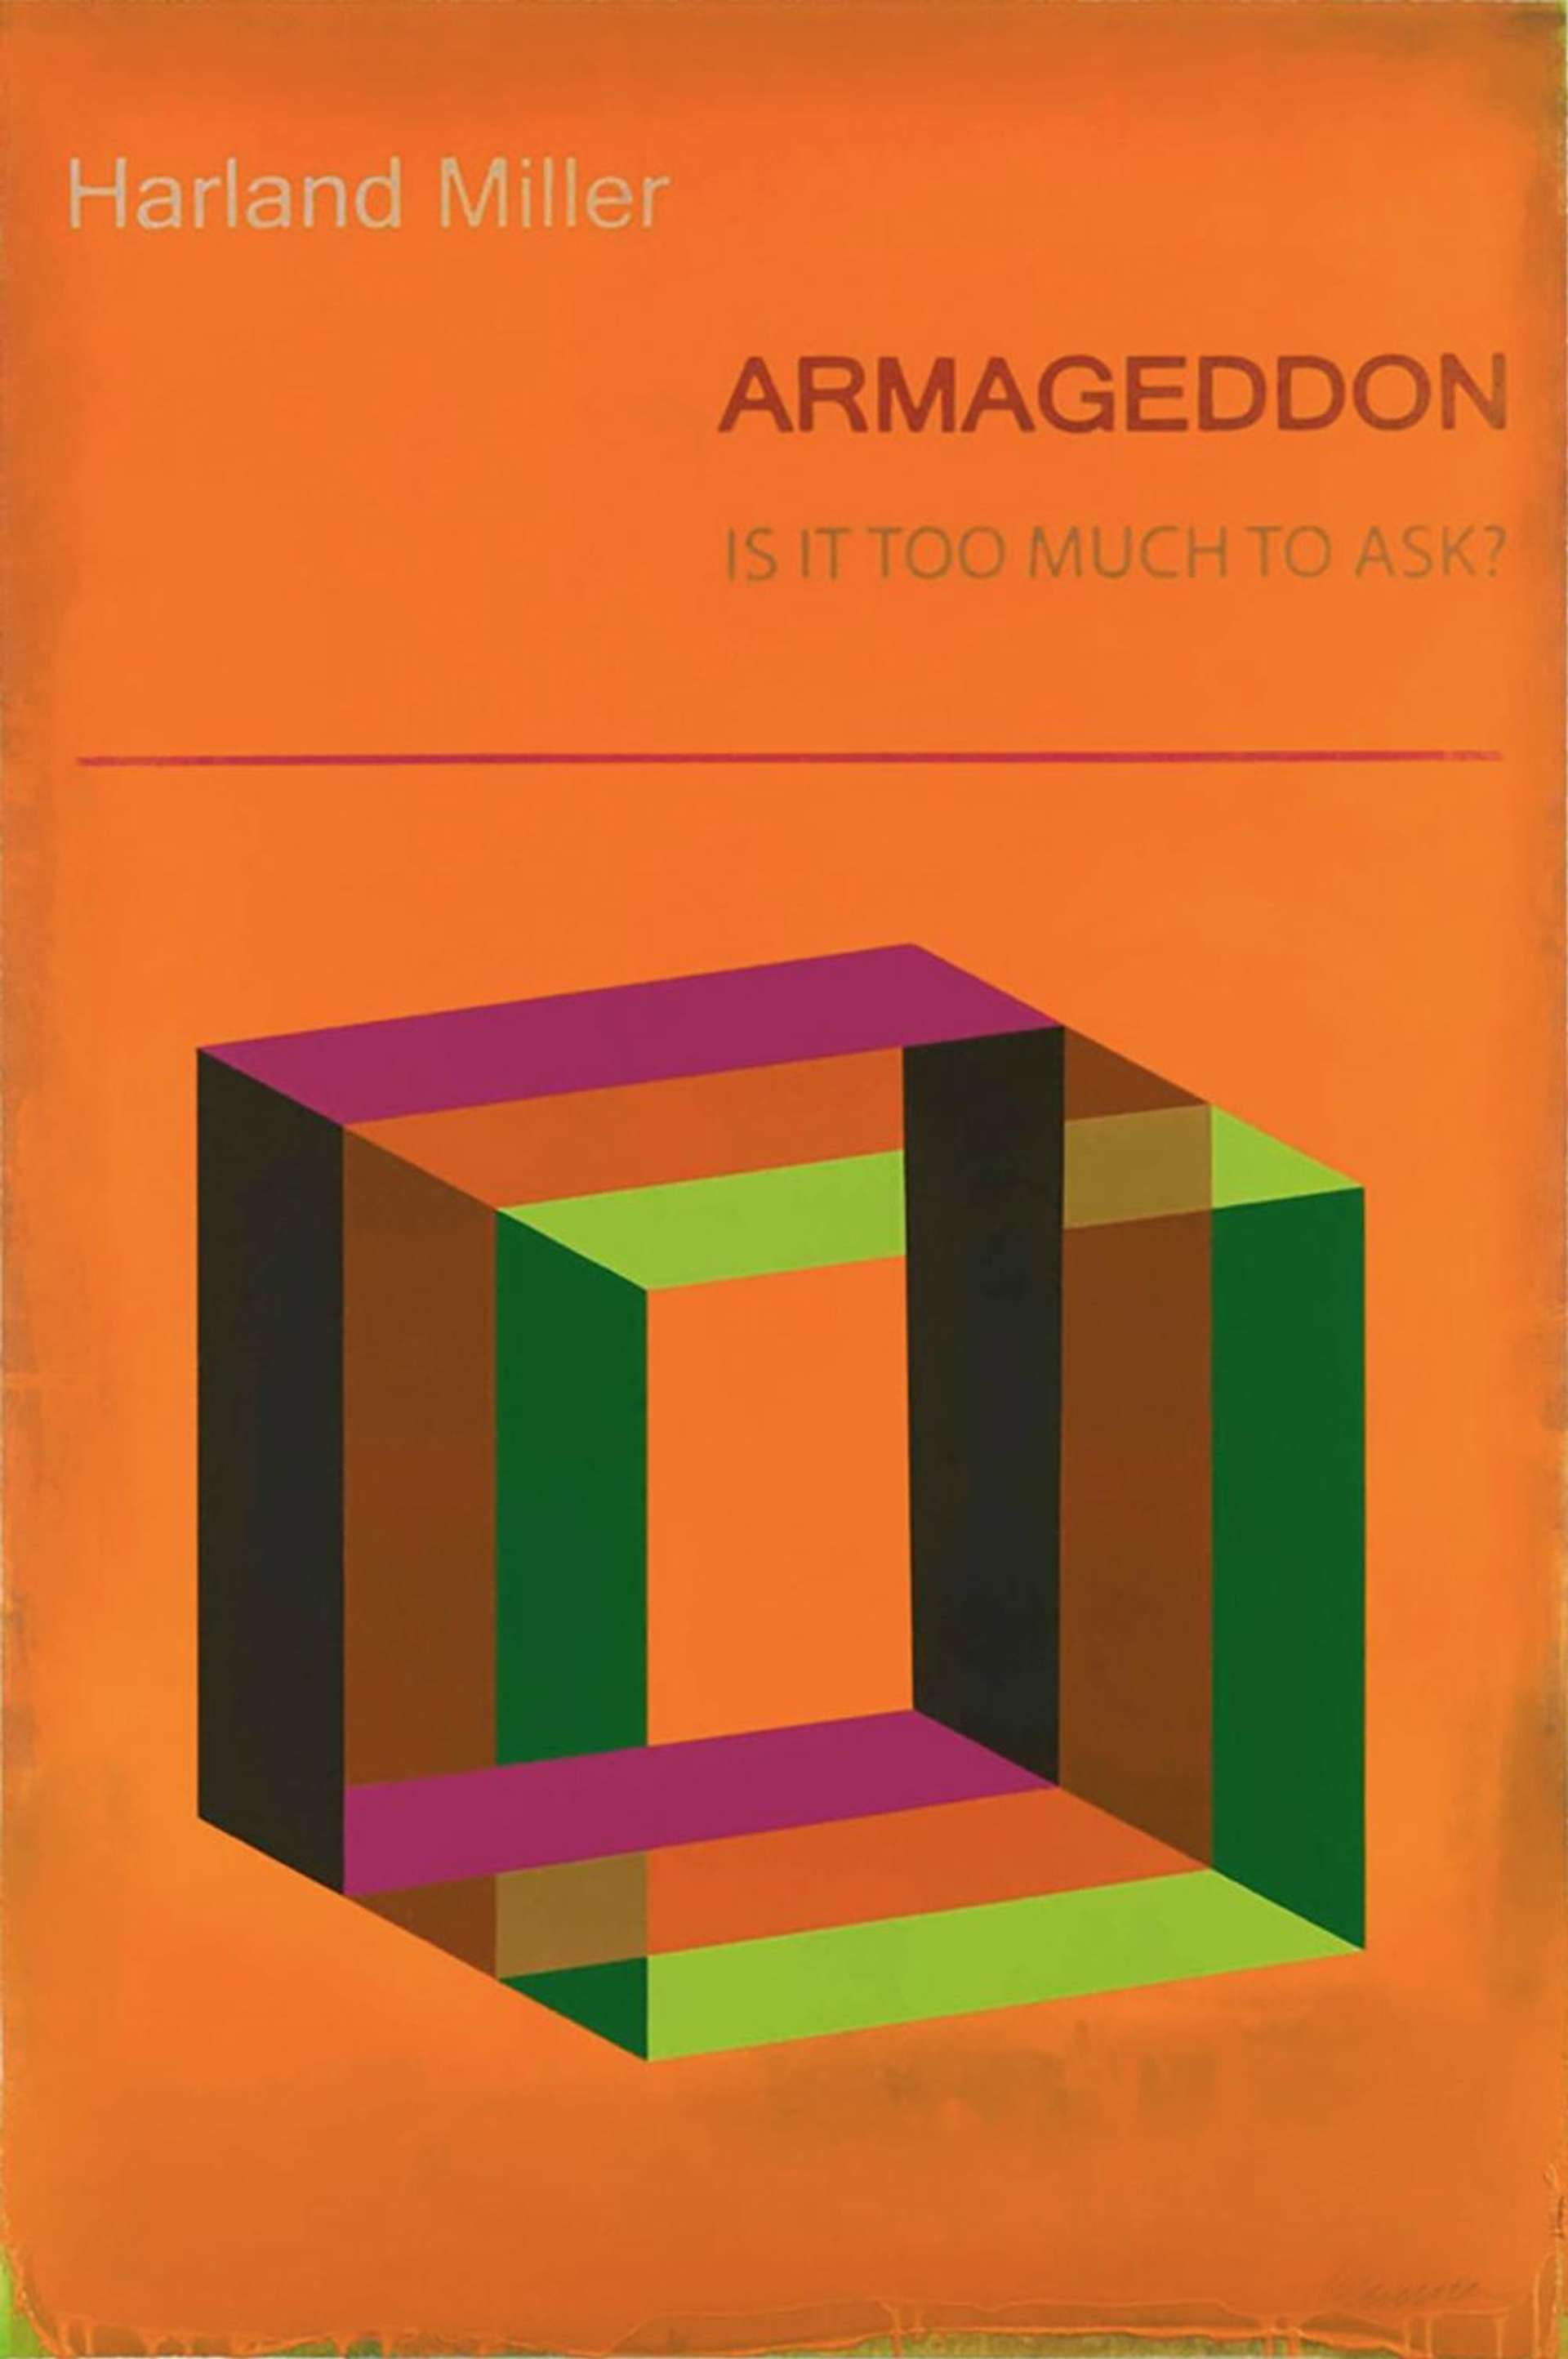 Armageddon Is It Too Much To Ask? by Harland Miller